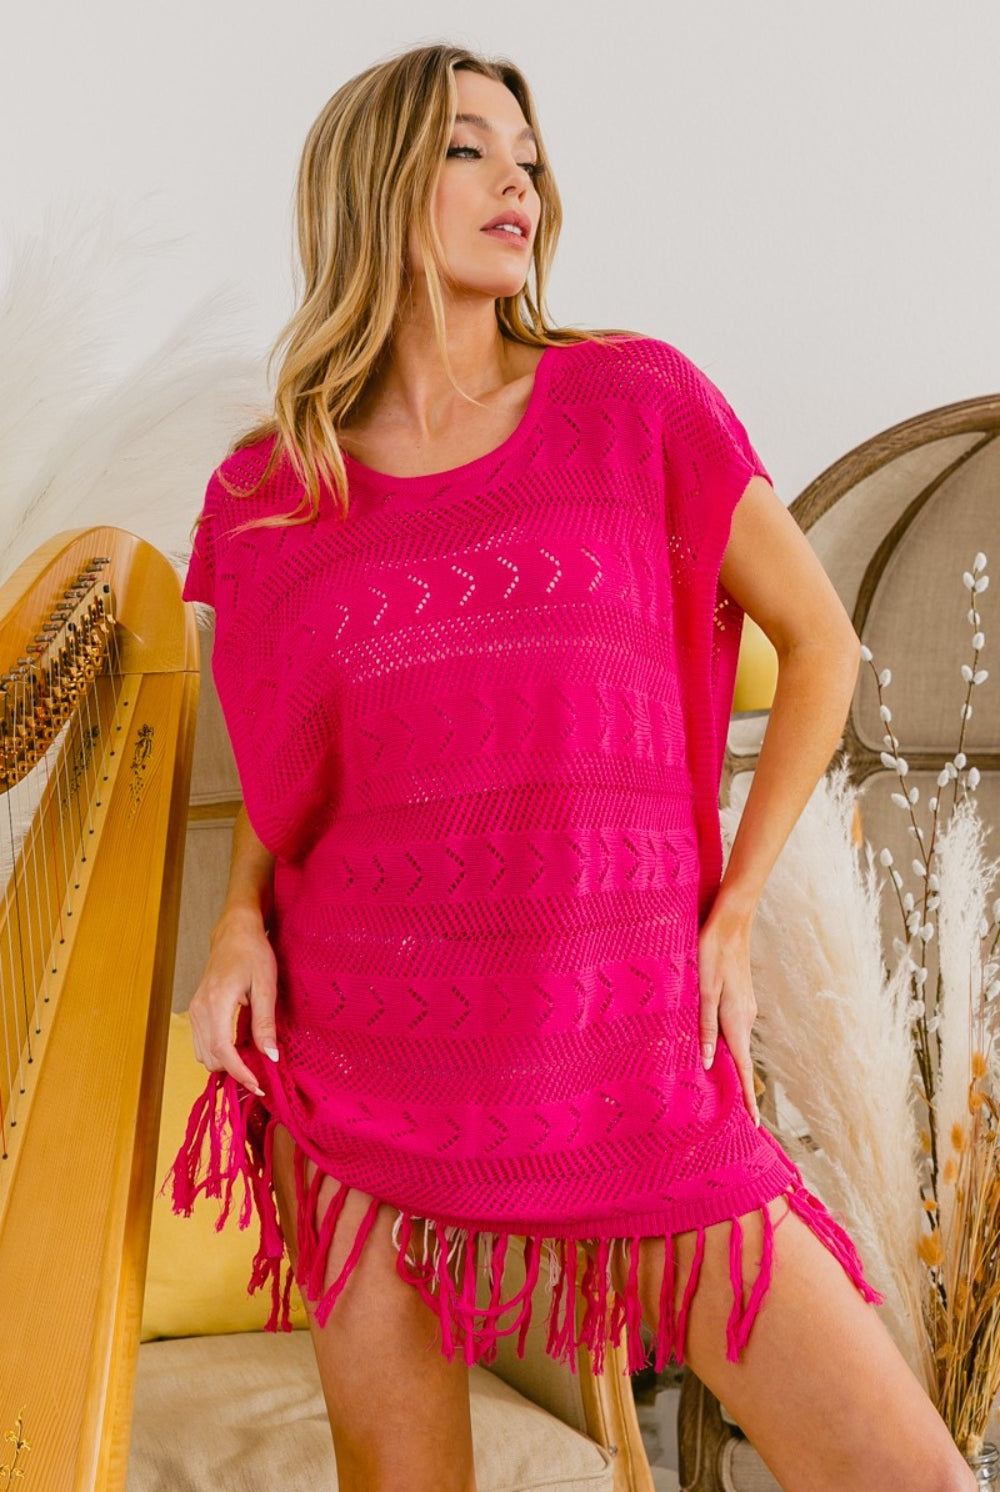 Stylish individual in a bohemian fringe knit top, ideal for a trendy, laid-back look.